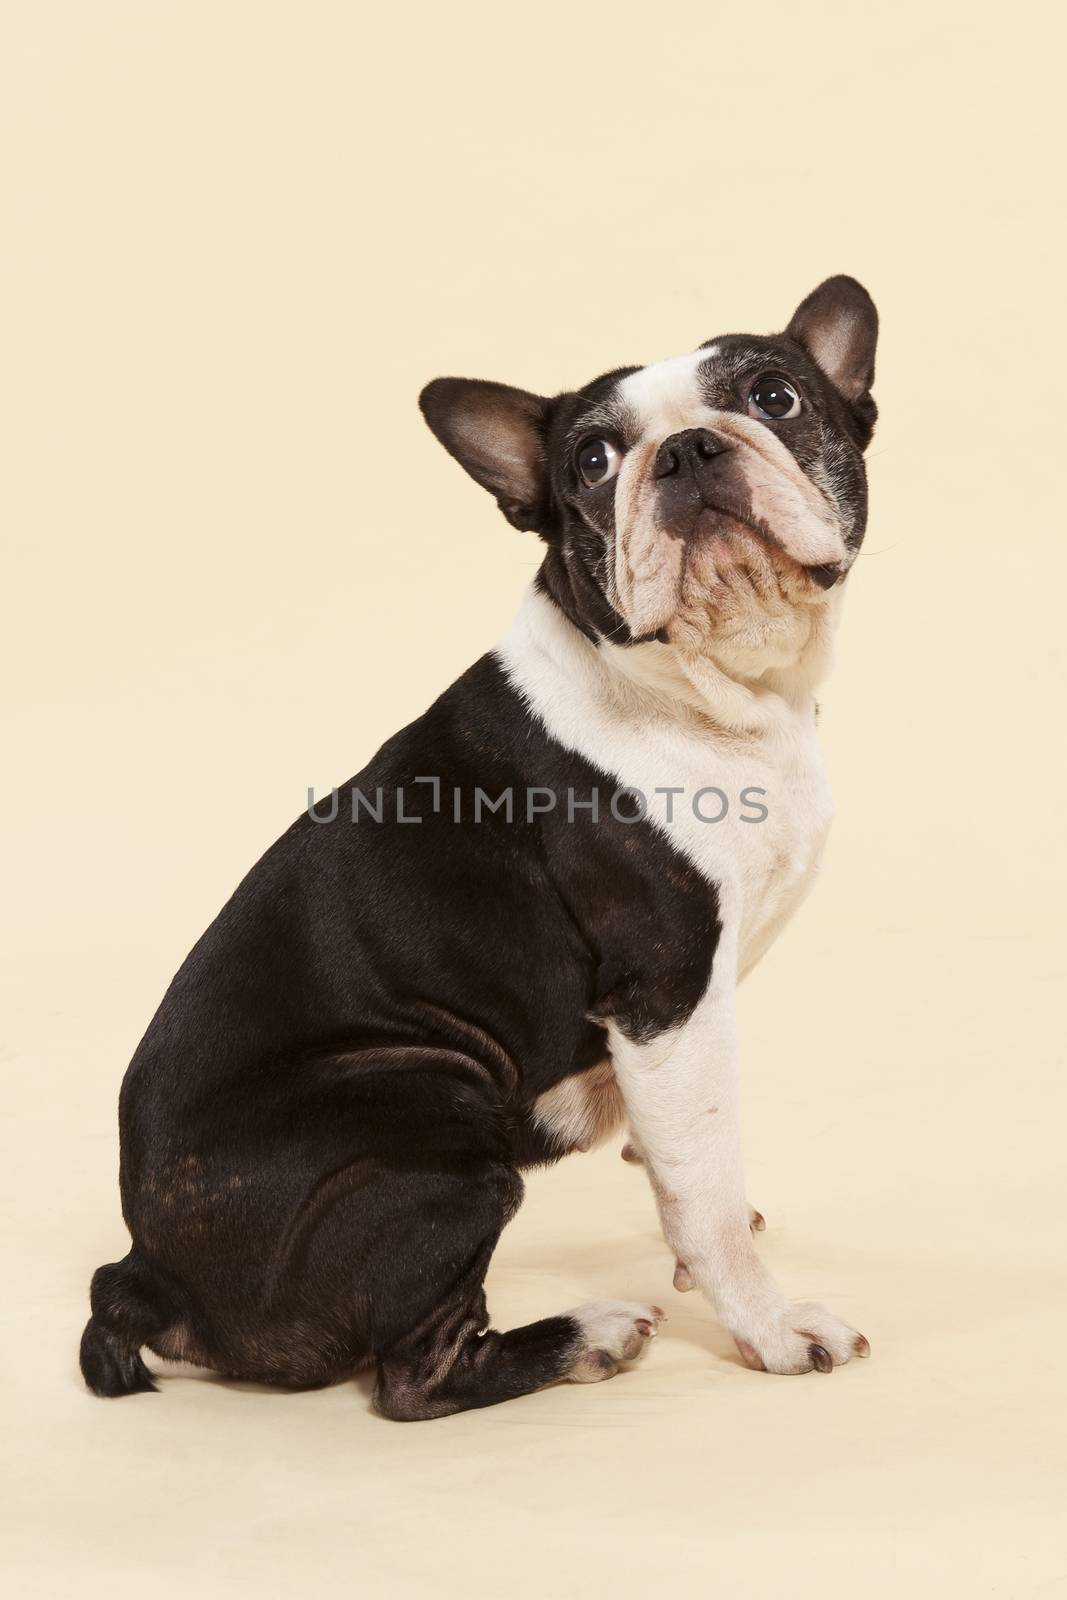 Cute french bulldog looking into the camera isolated on neutral background. Cute dog.